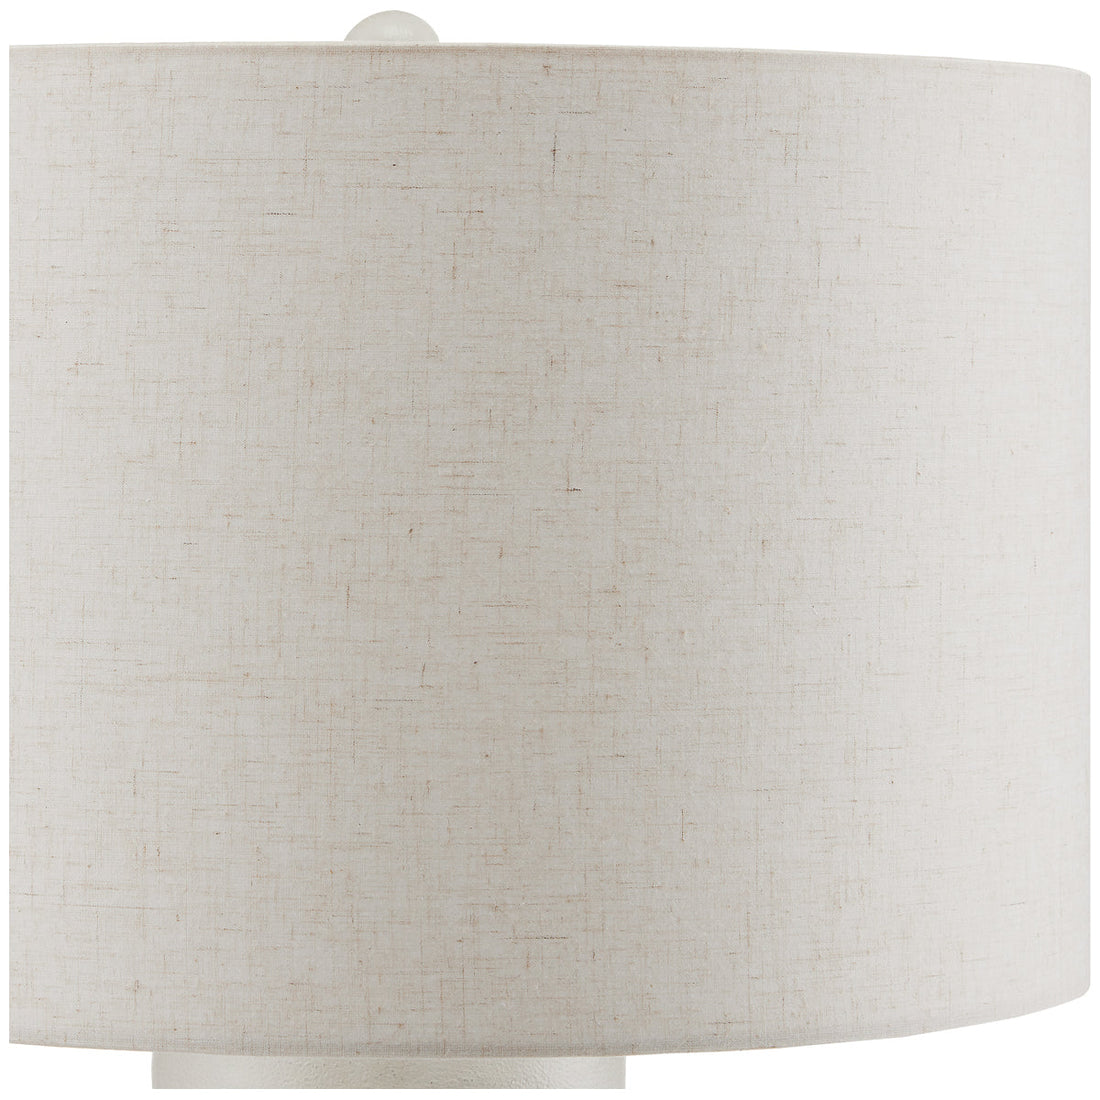 Currey and Company Linz Table Lamp